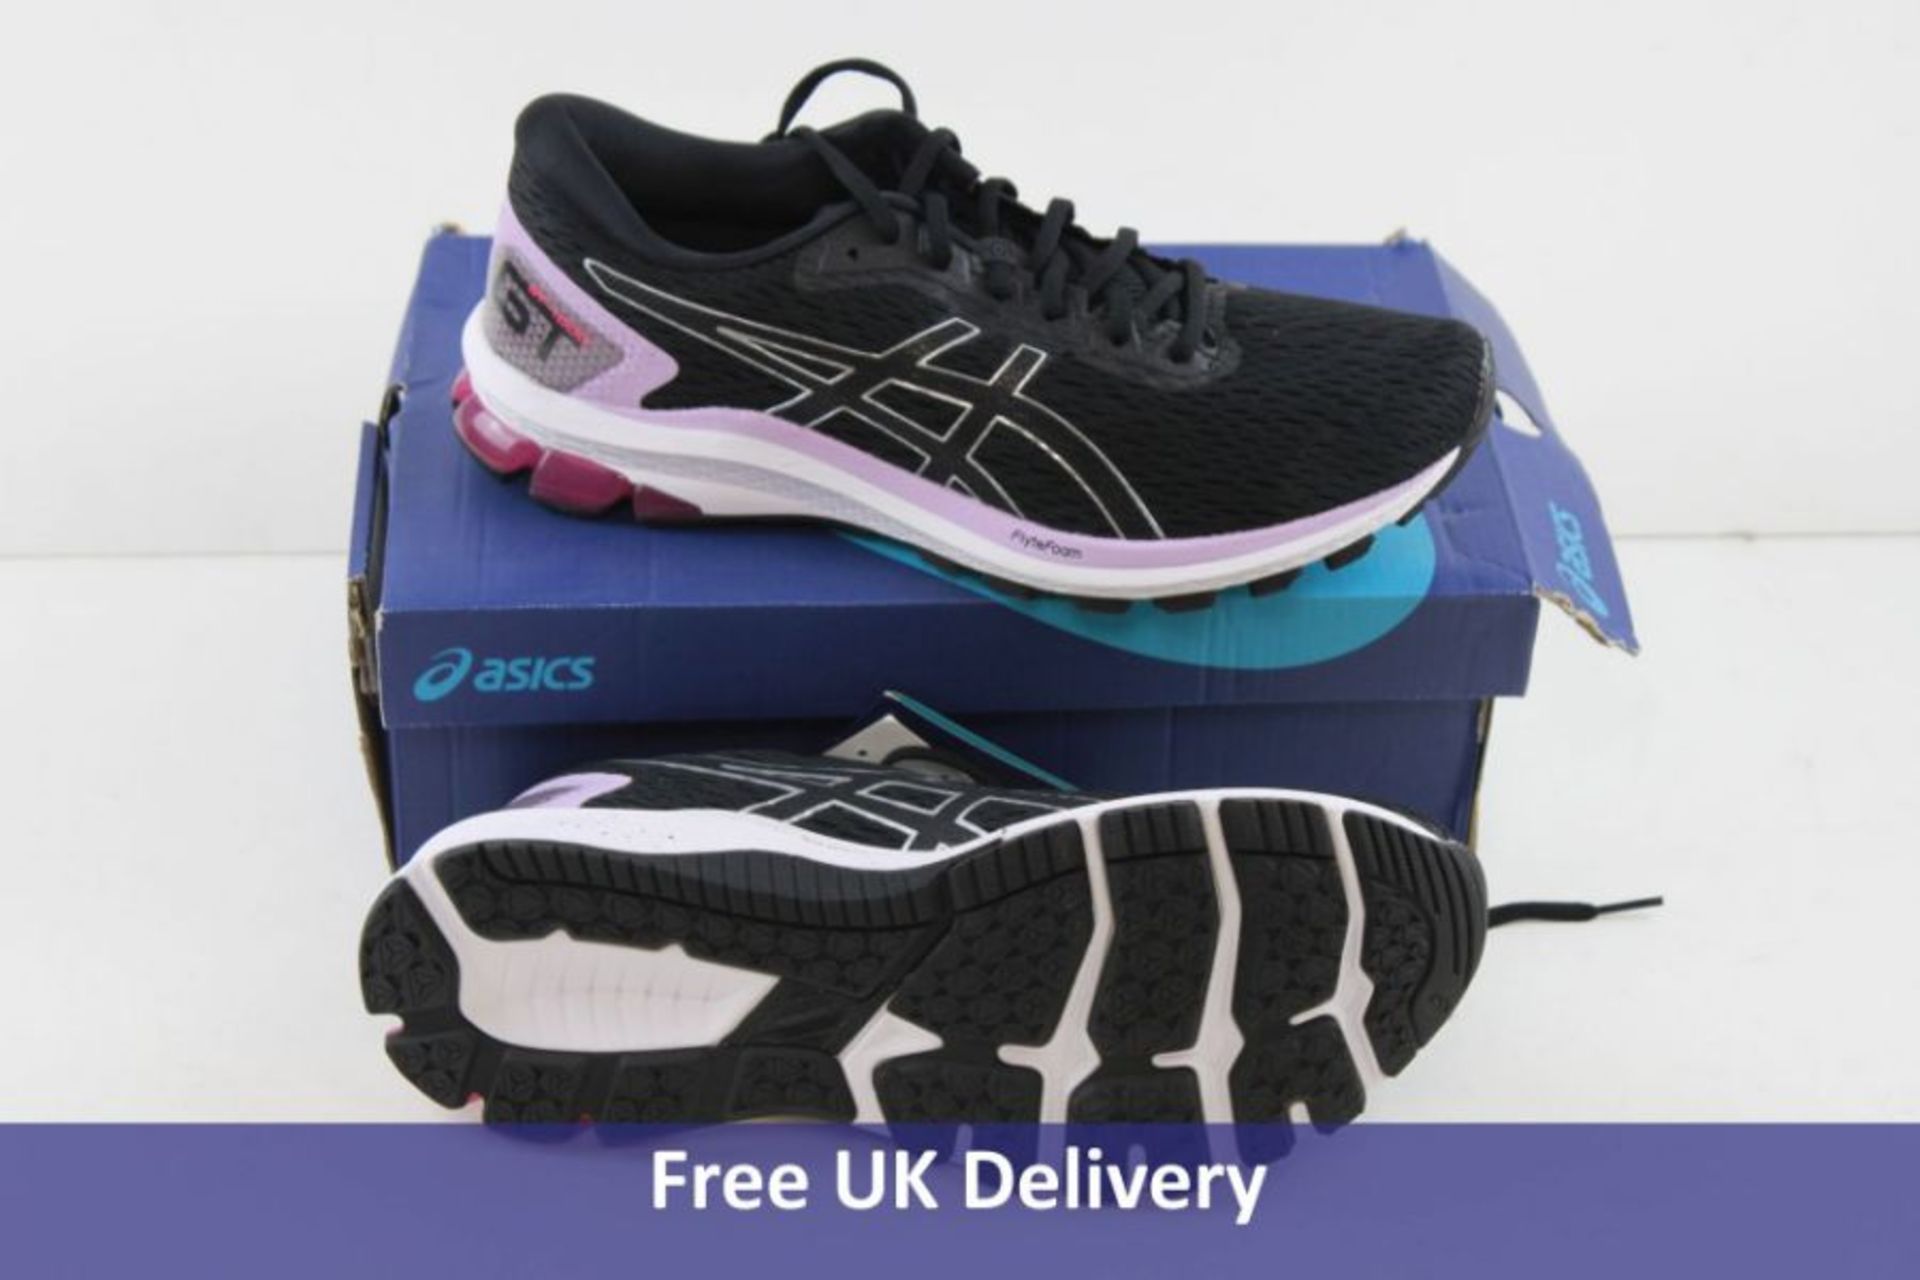 Asics Women's GT 1000 9 Trainers, Black and Pure Silver, UK 10